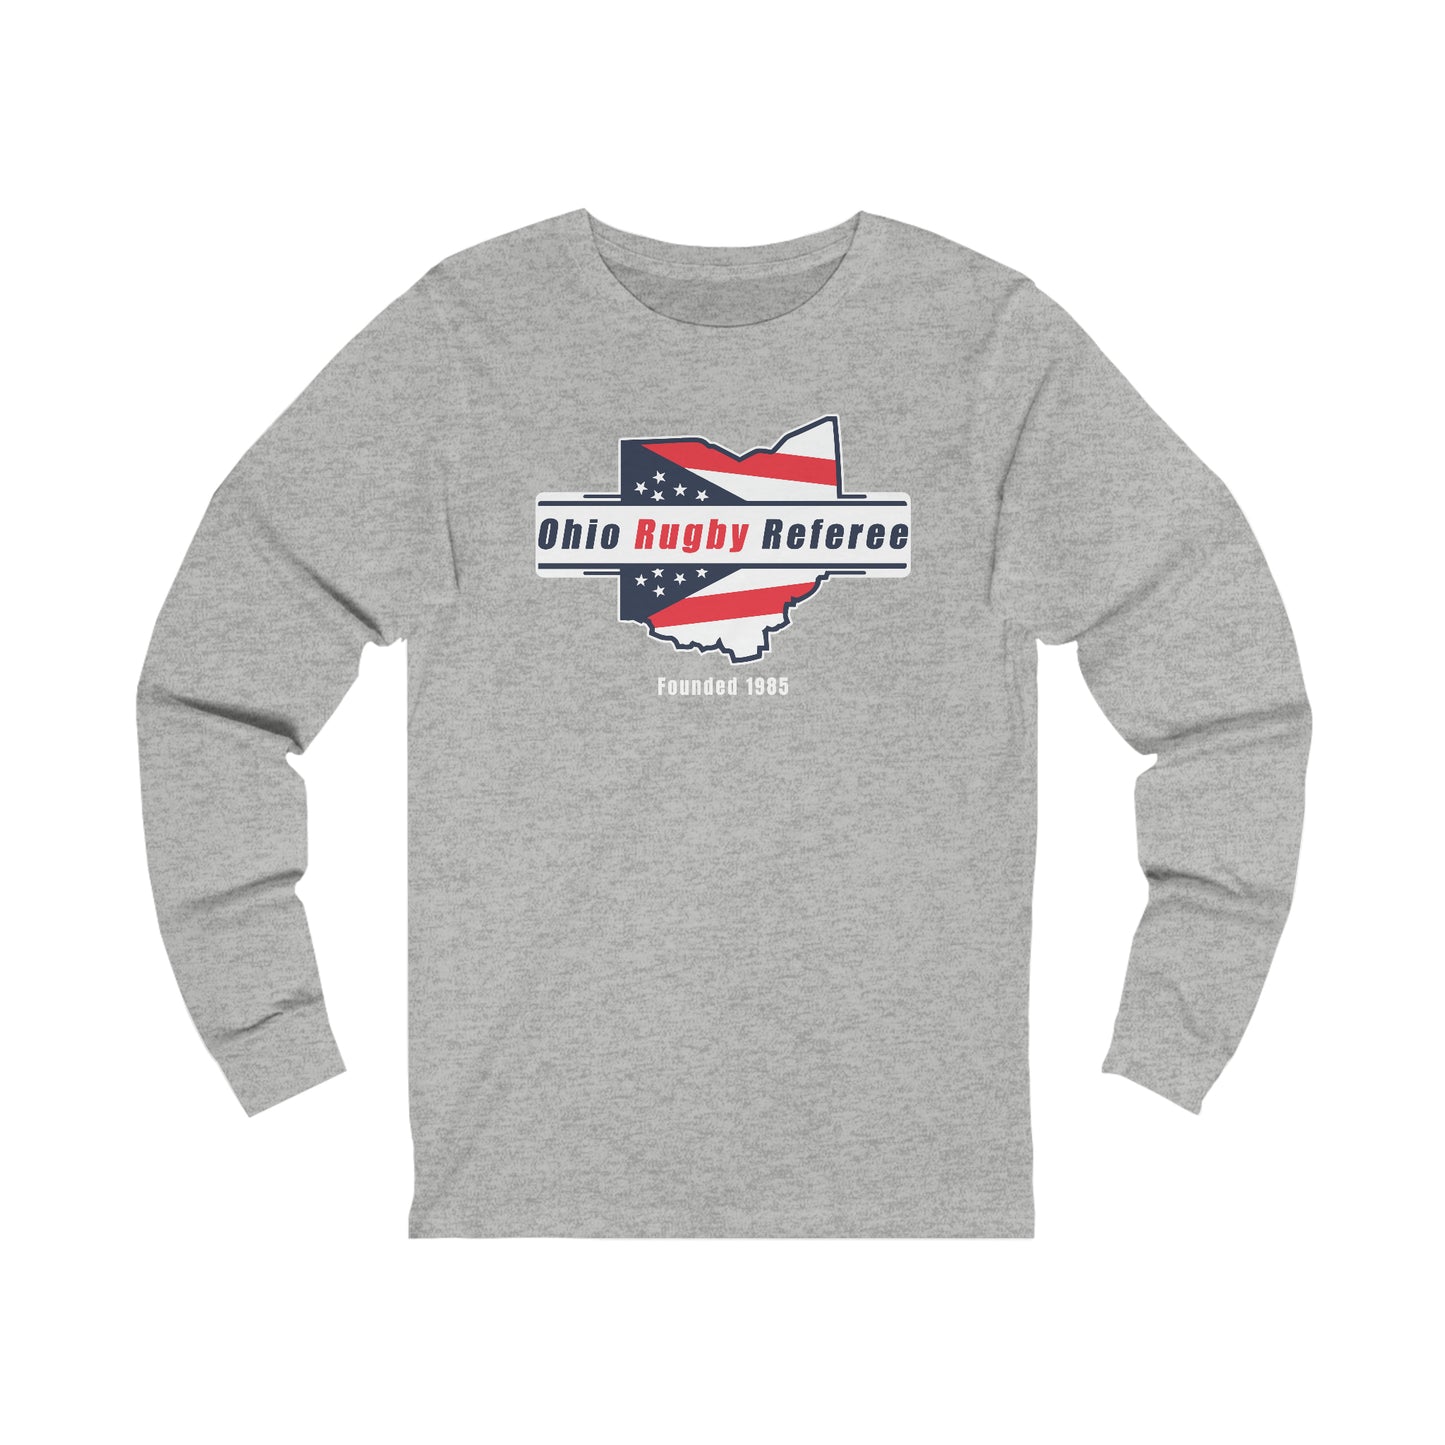 Unisex Jersey Long Sleeve Tee | Ohio Rugby Referee Society